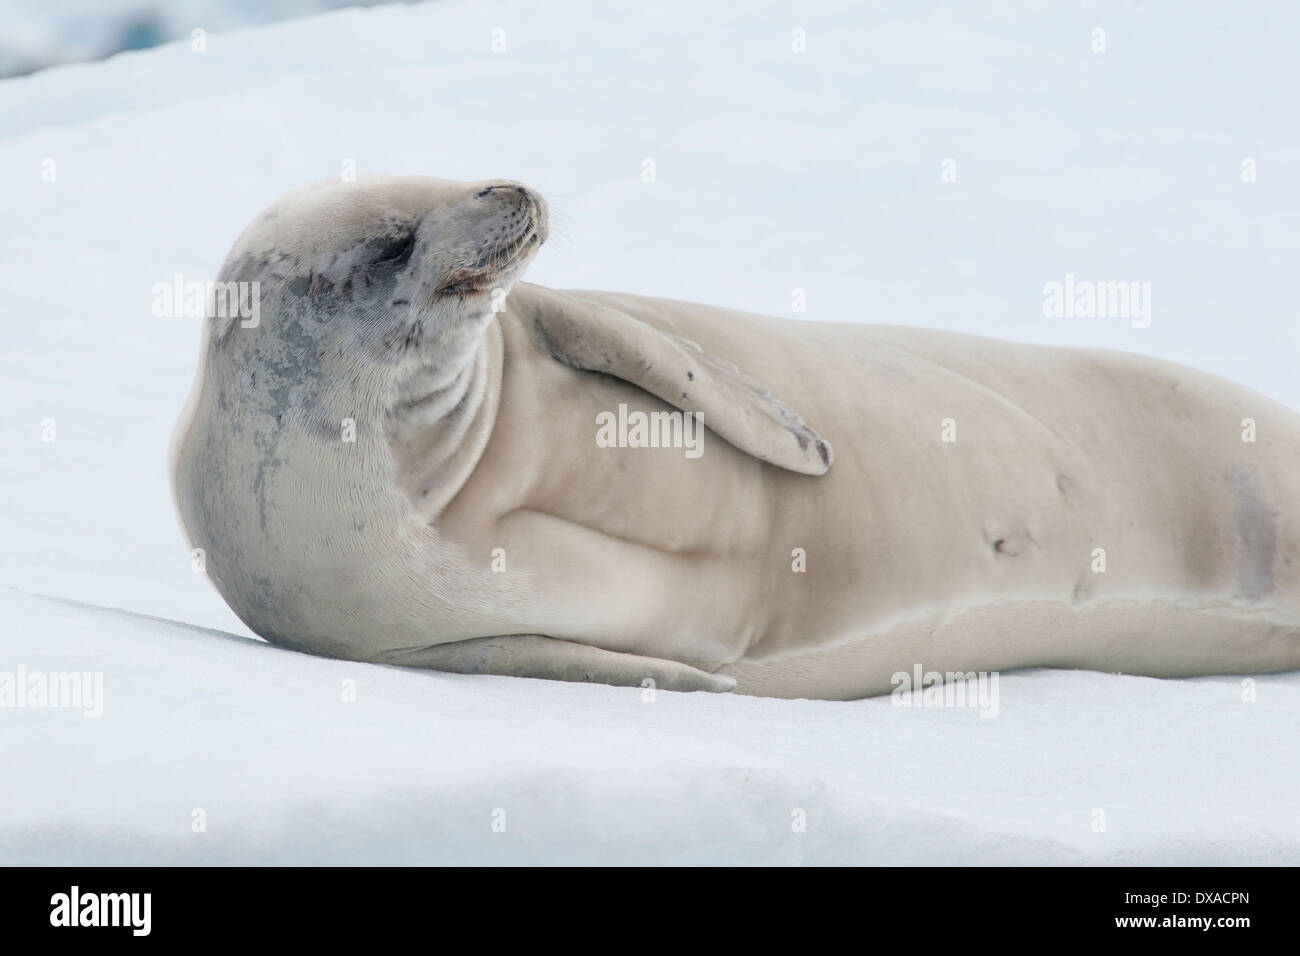 Crabeater seal, Lobodon carcinophagus, resting on an iceberg with glacier in background. Antarctic Peninsula. Stock Photo